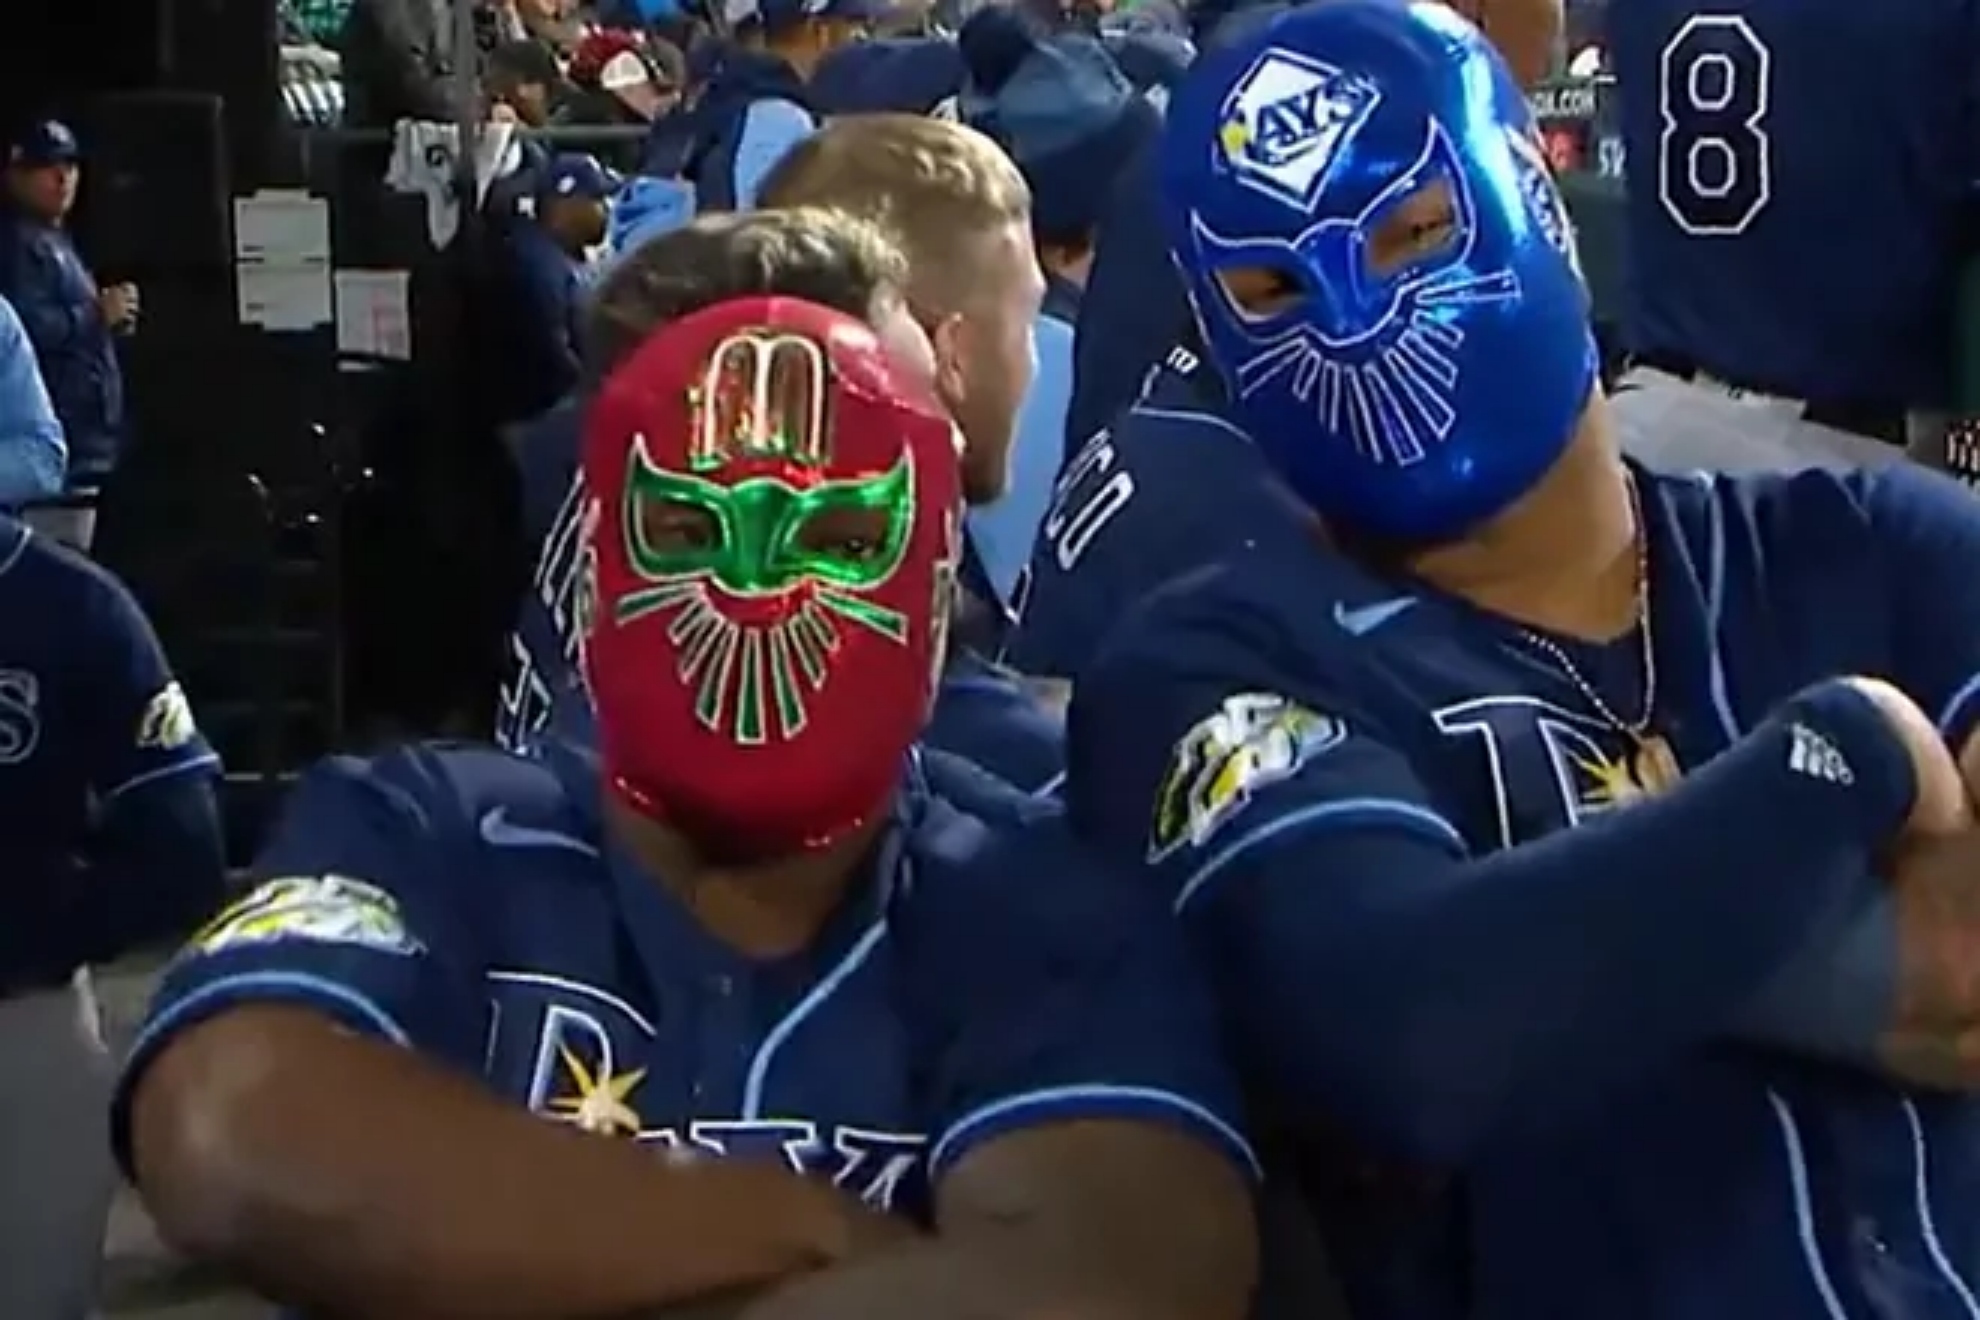 Randy Arozarena and Isaac Paredes lead the Rays to the top of the MLB and celebrate with a wrestling mask